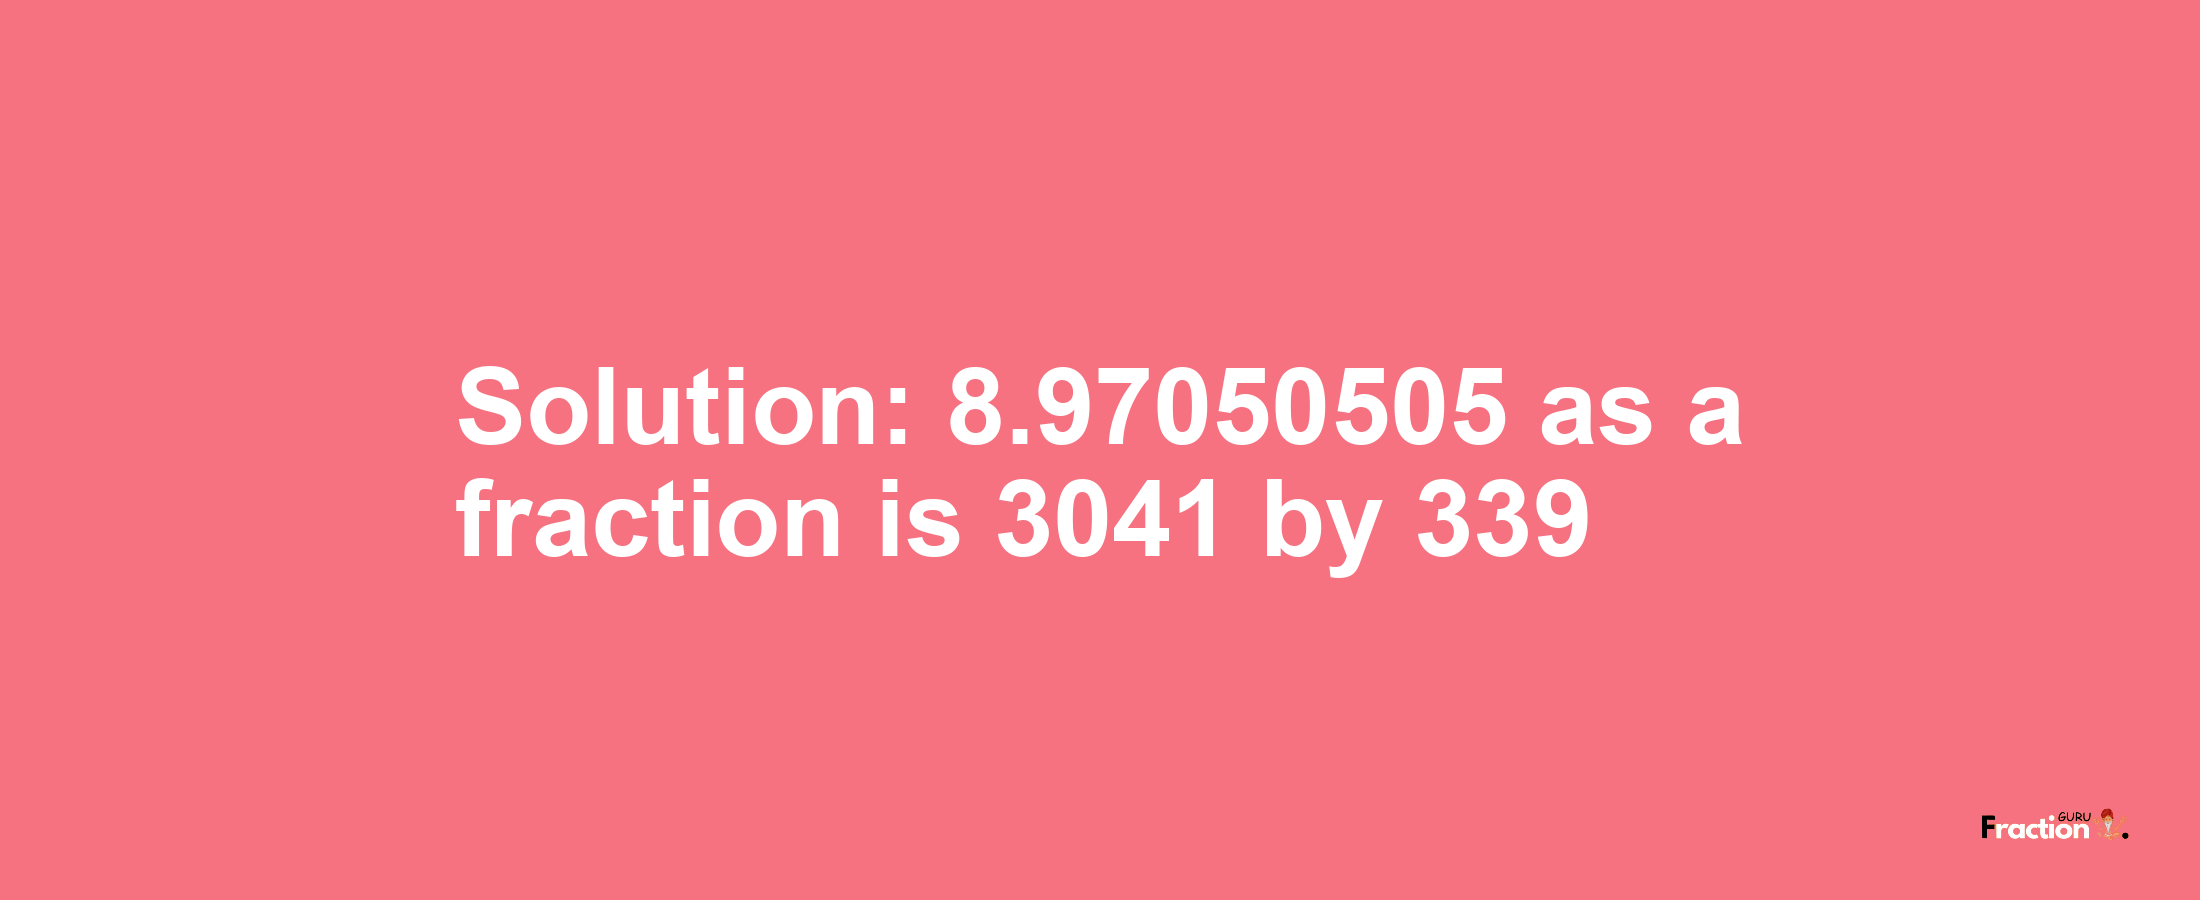 Solution:8.97050505 as a fraction is 3041/339